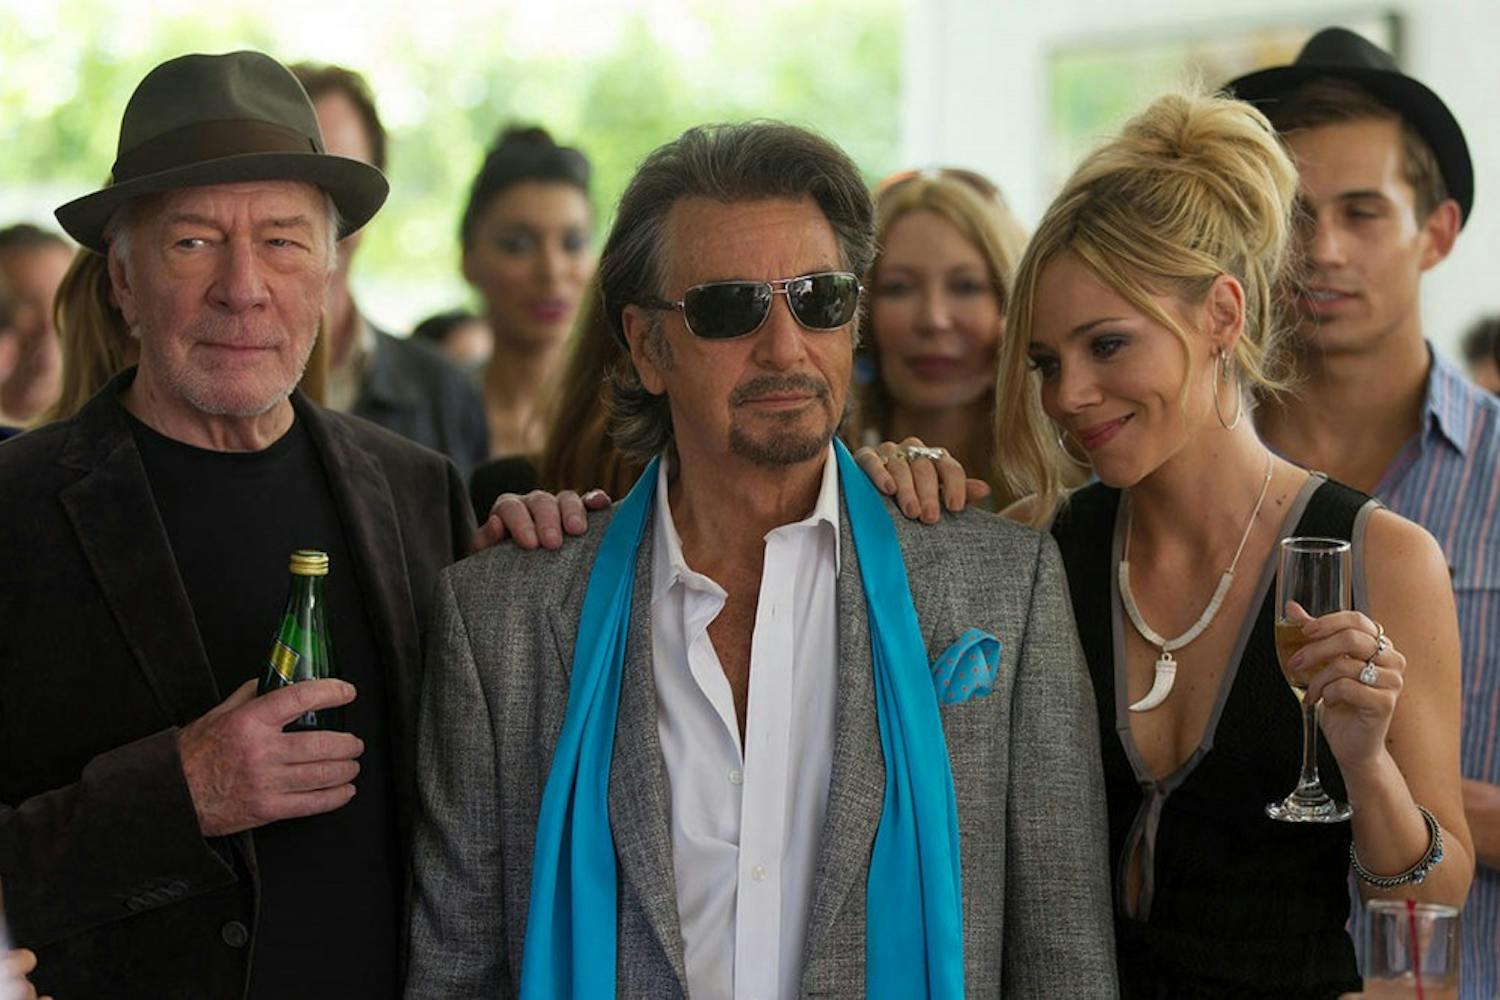 ENTER DANNYCOLLINS-MOVIE-REVIEW 5 MCT